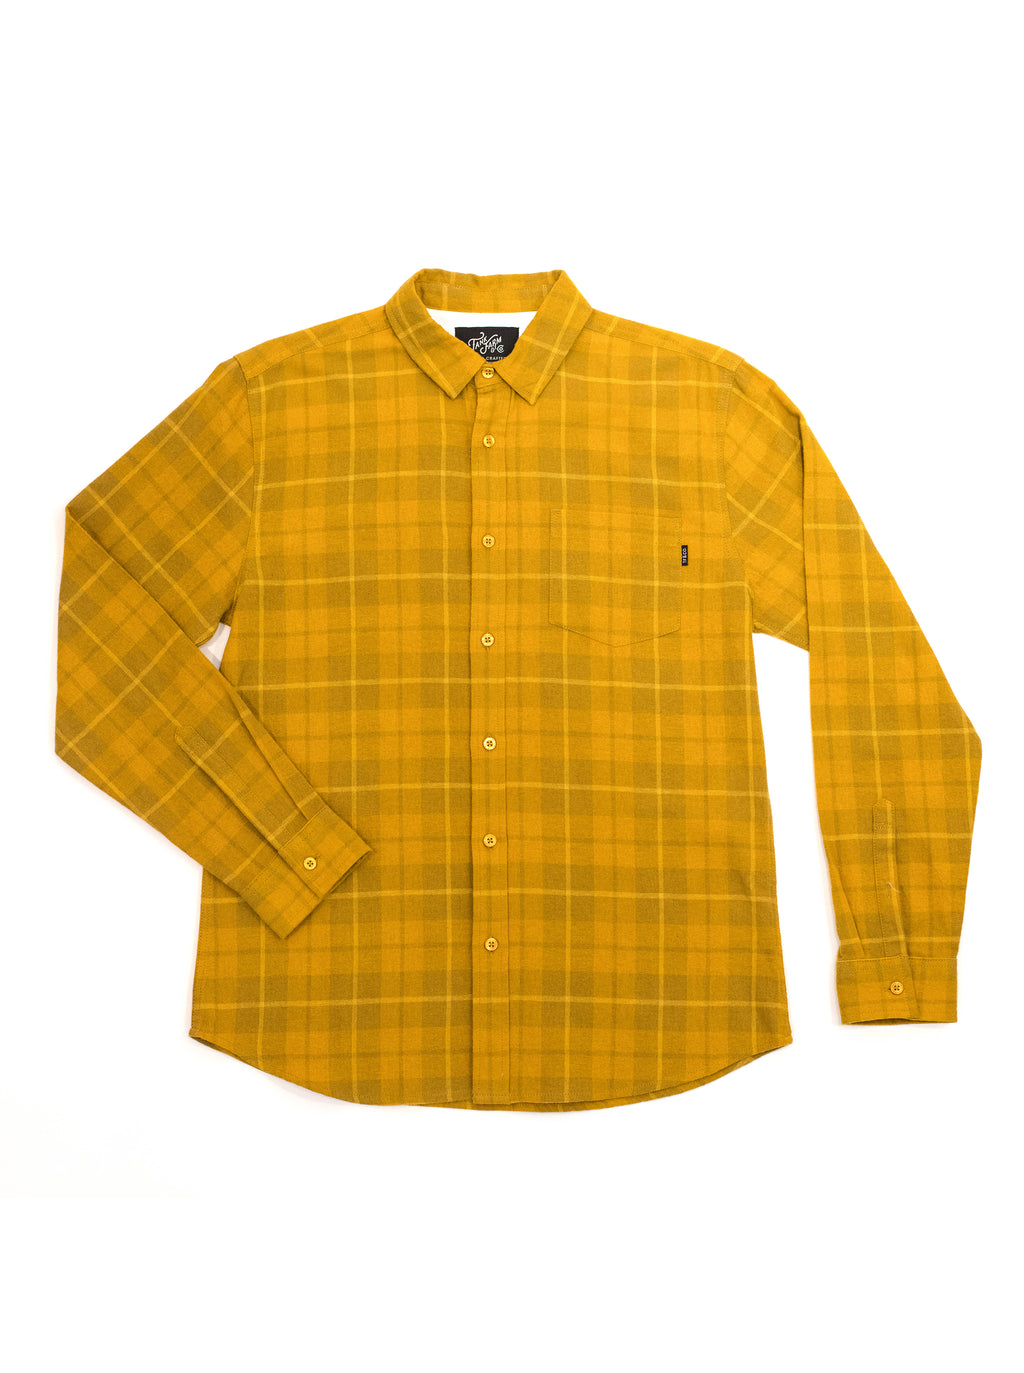 ABDS FLANNEL YELLOW - Anderson Bros Design and Supply